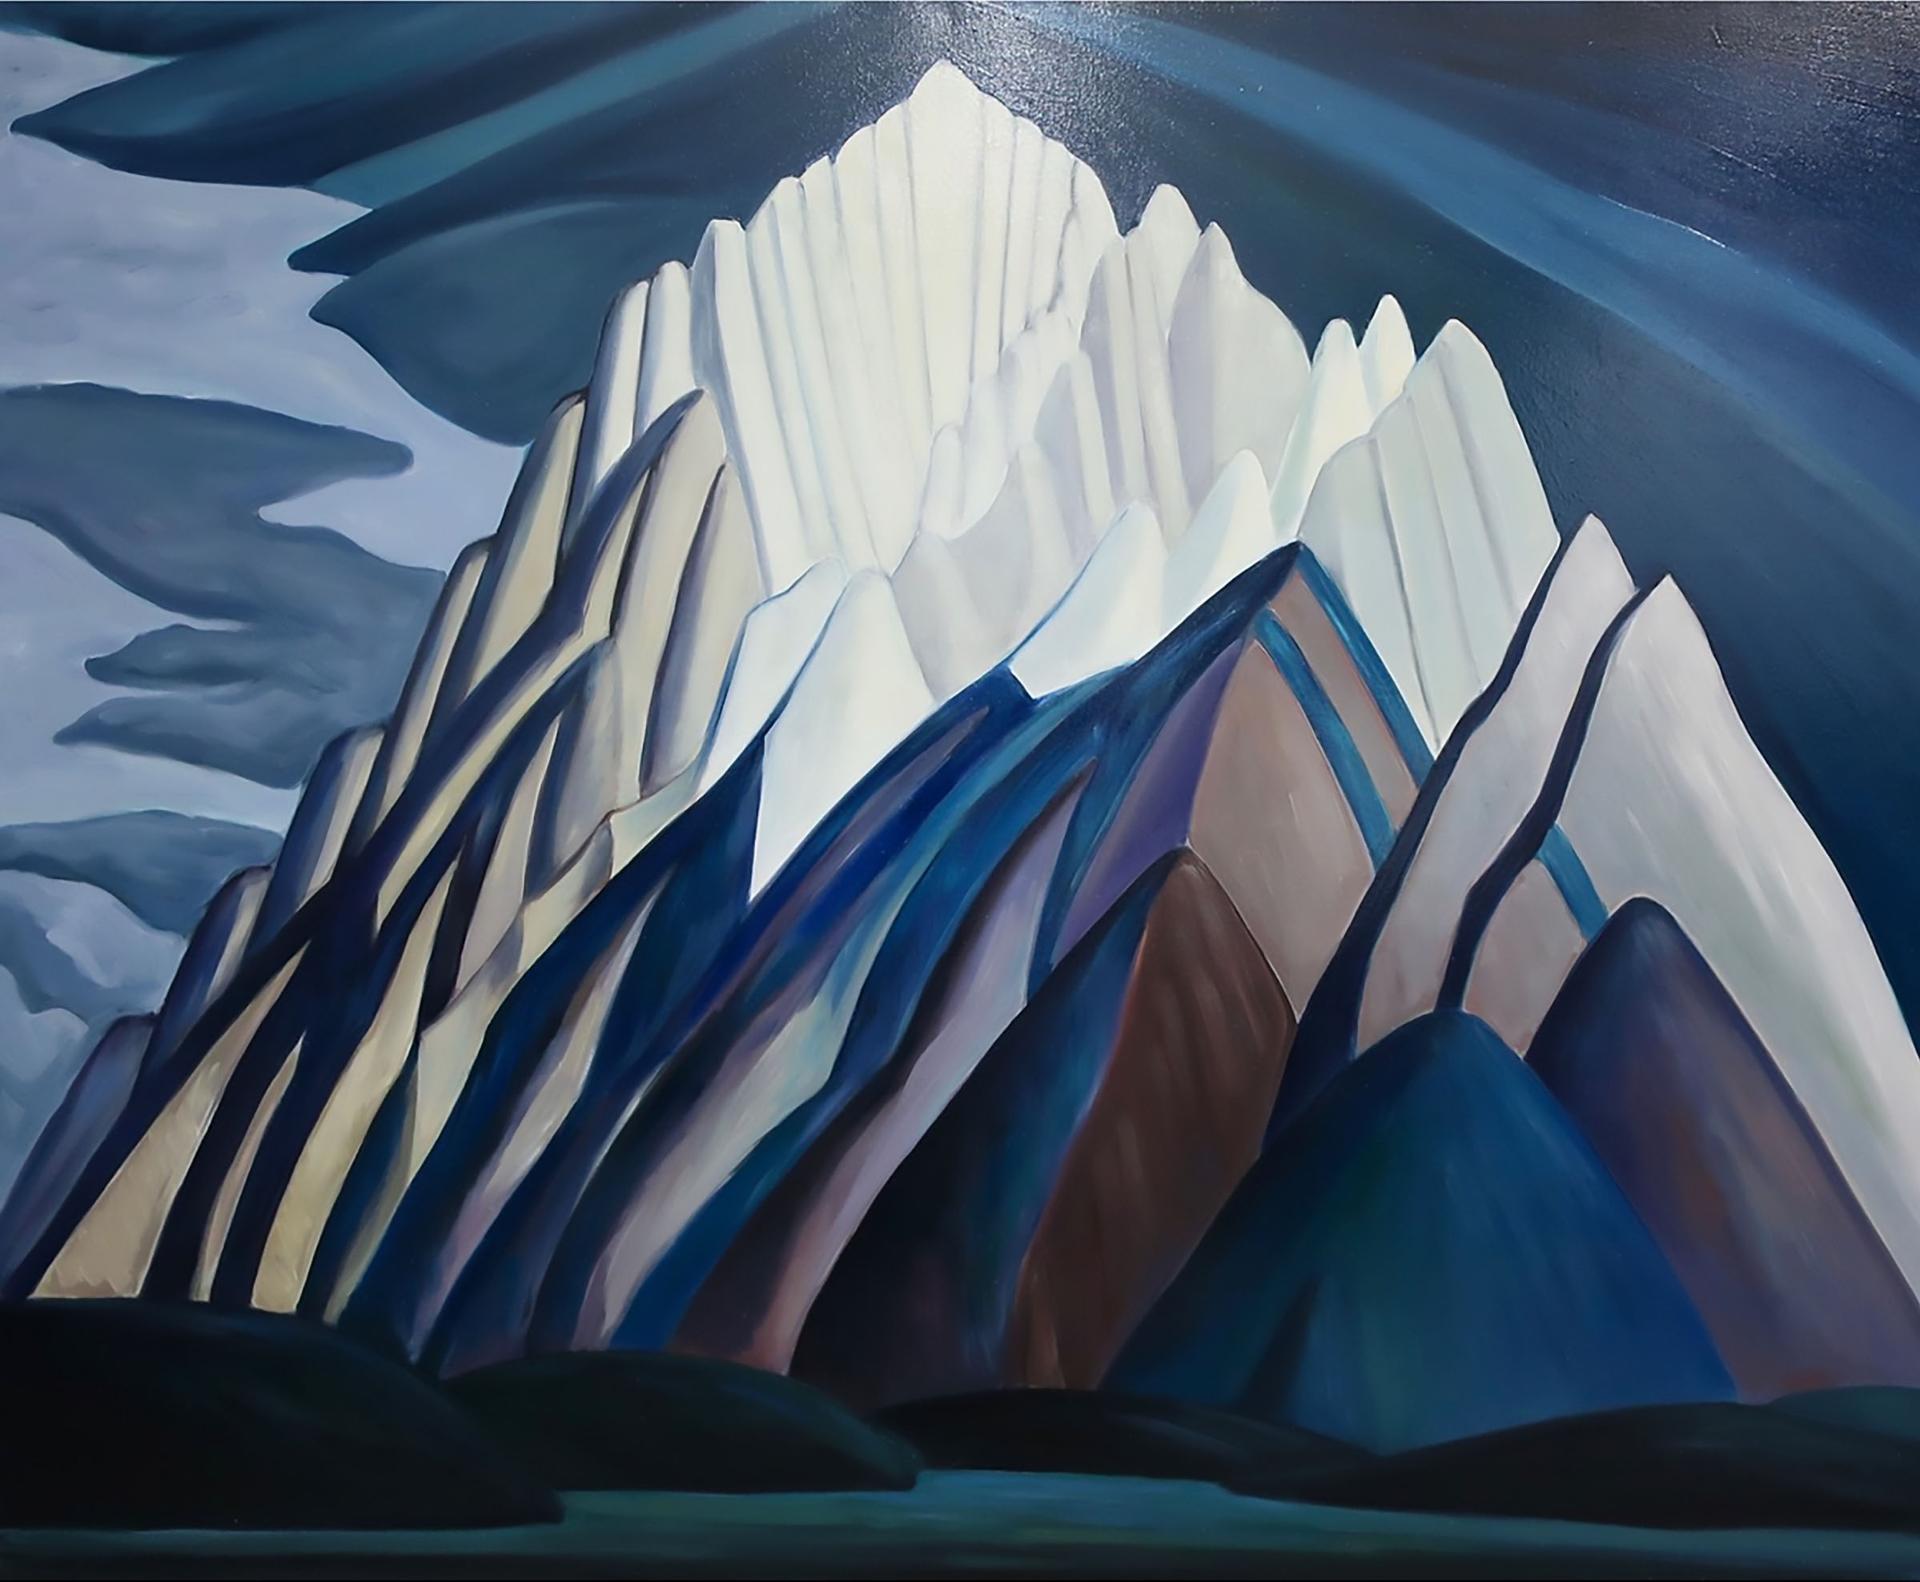 Serge Deherian (1955) - Untitled (Mountain Forms)